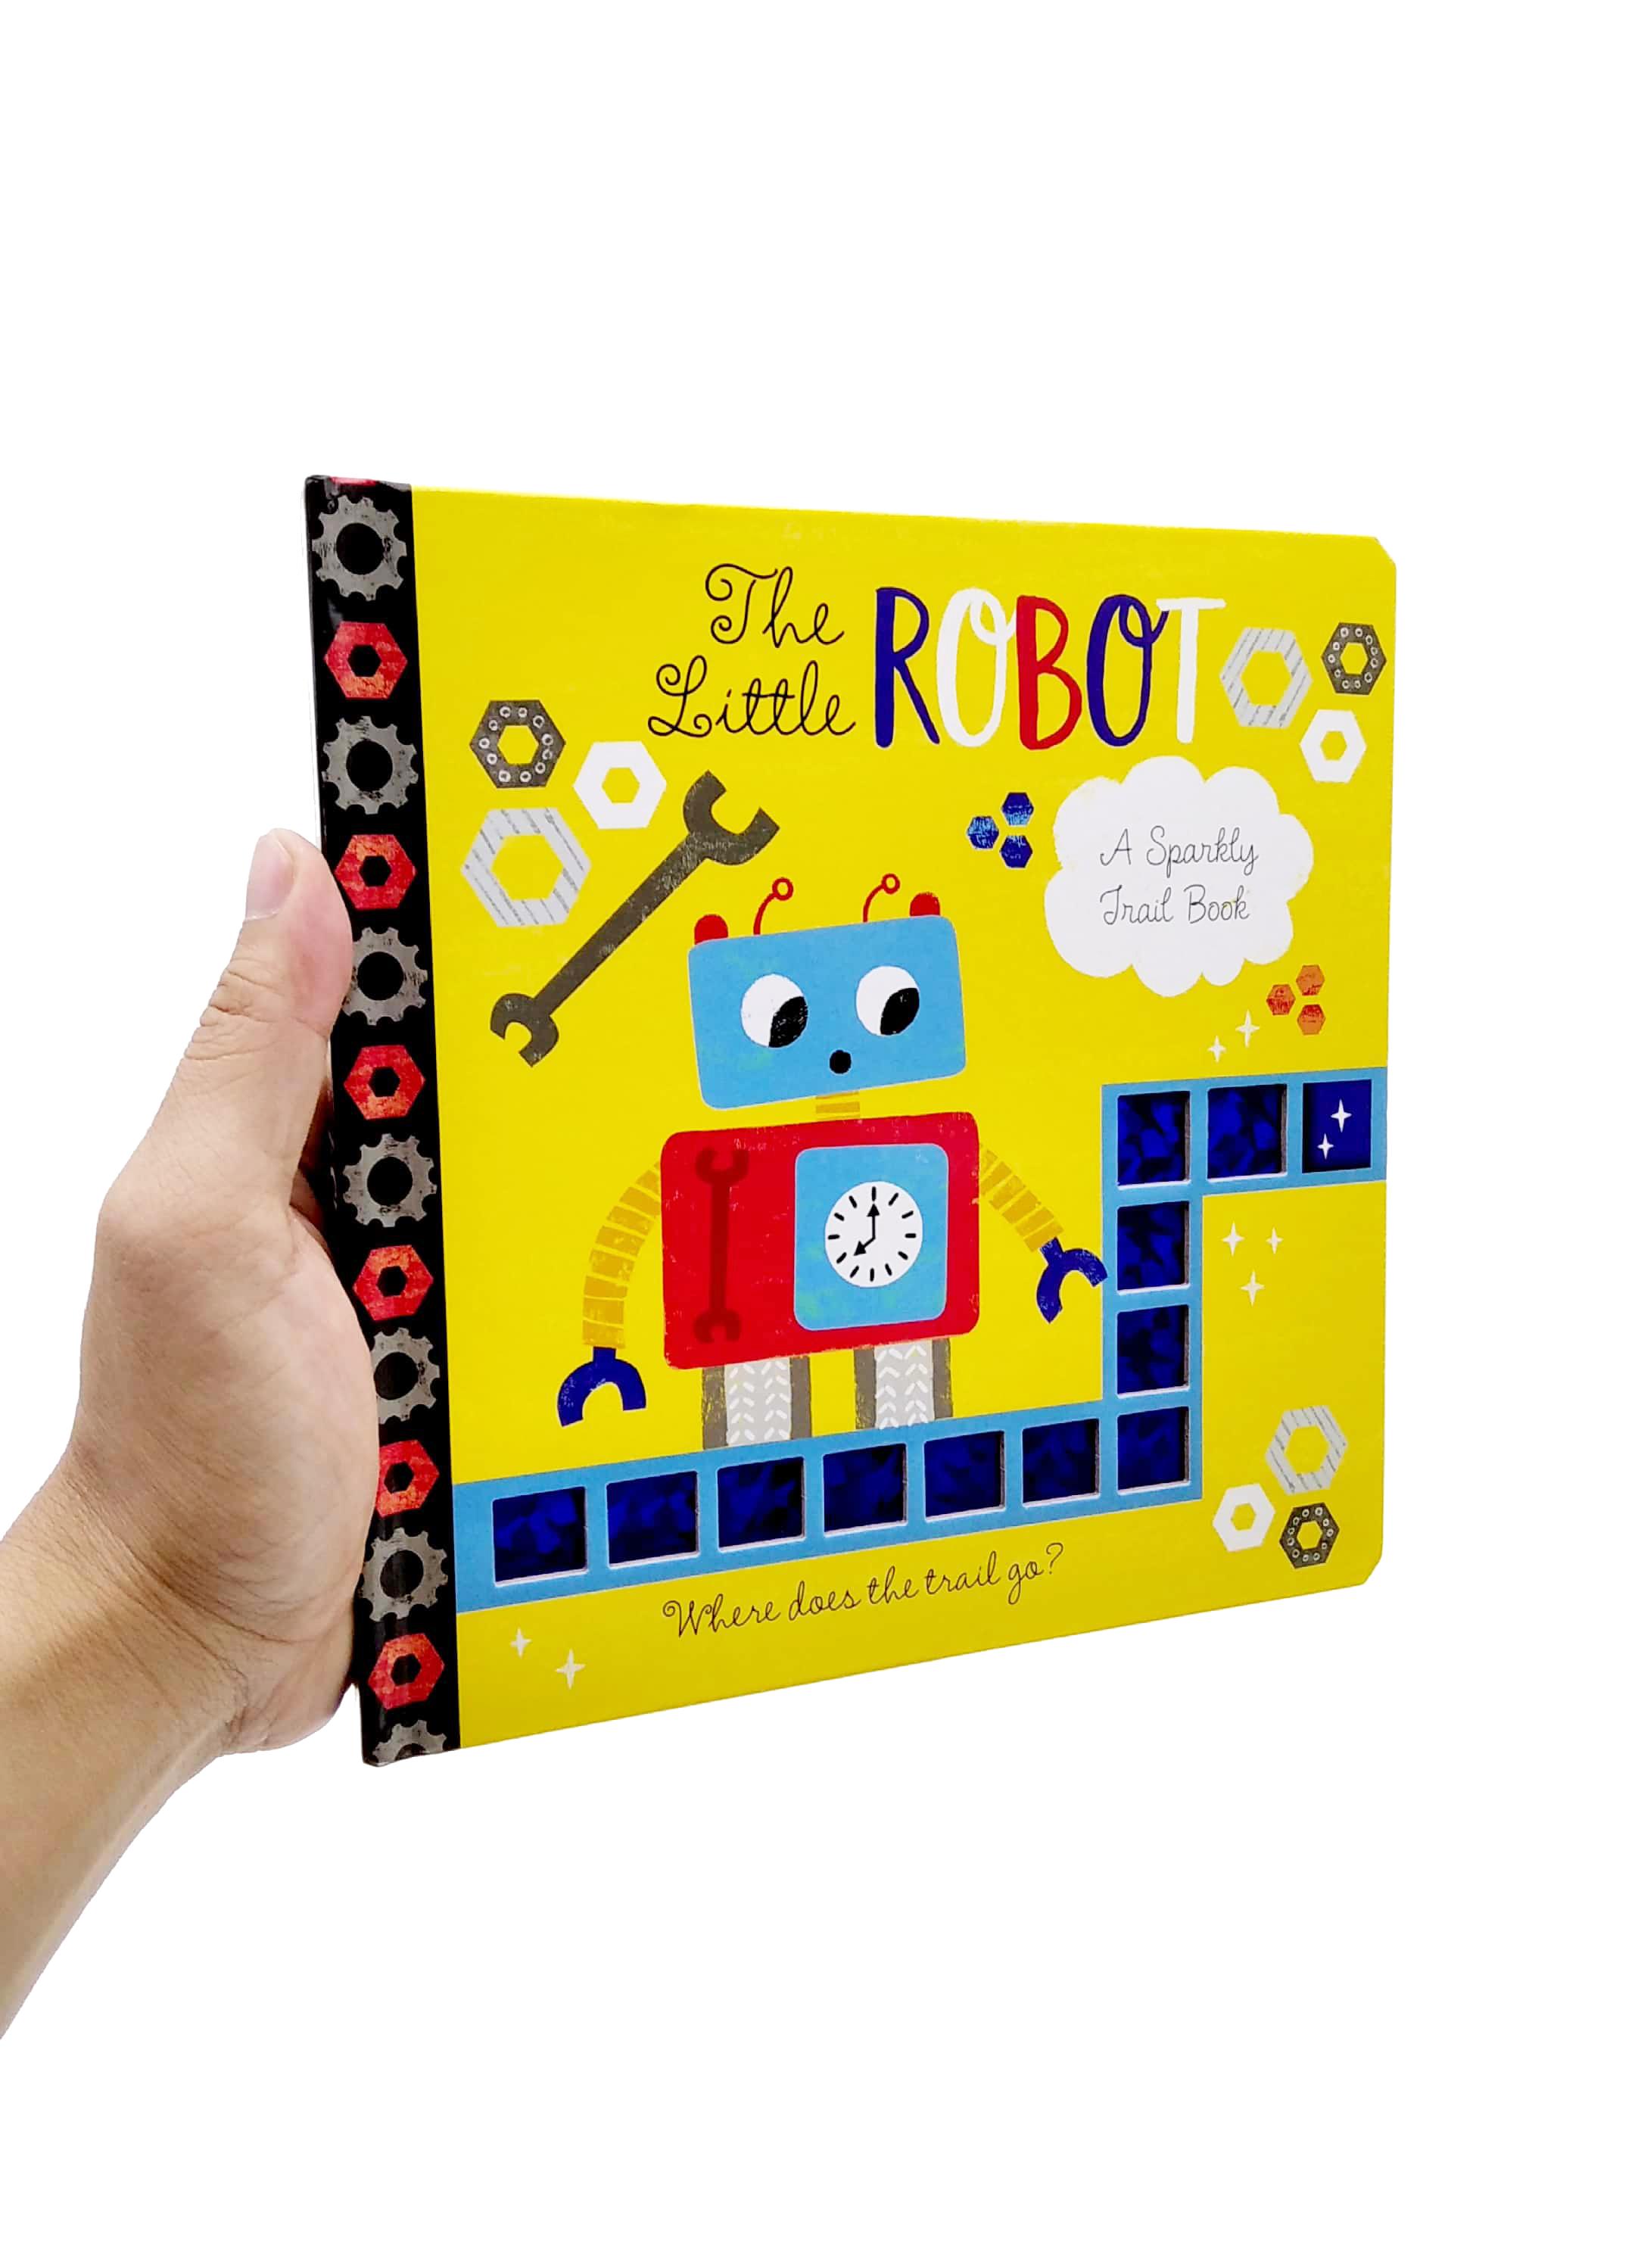 A Sparkly Trail Book: Robot